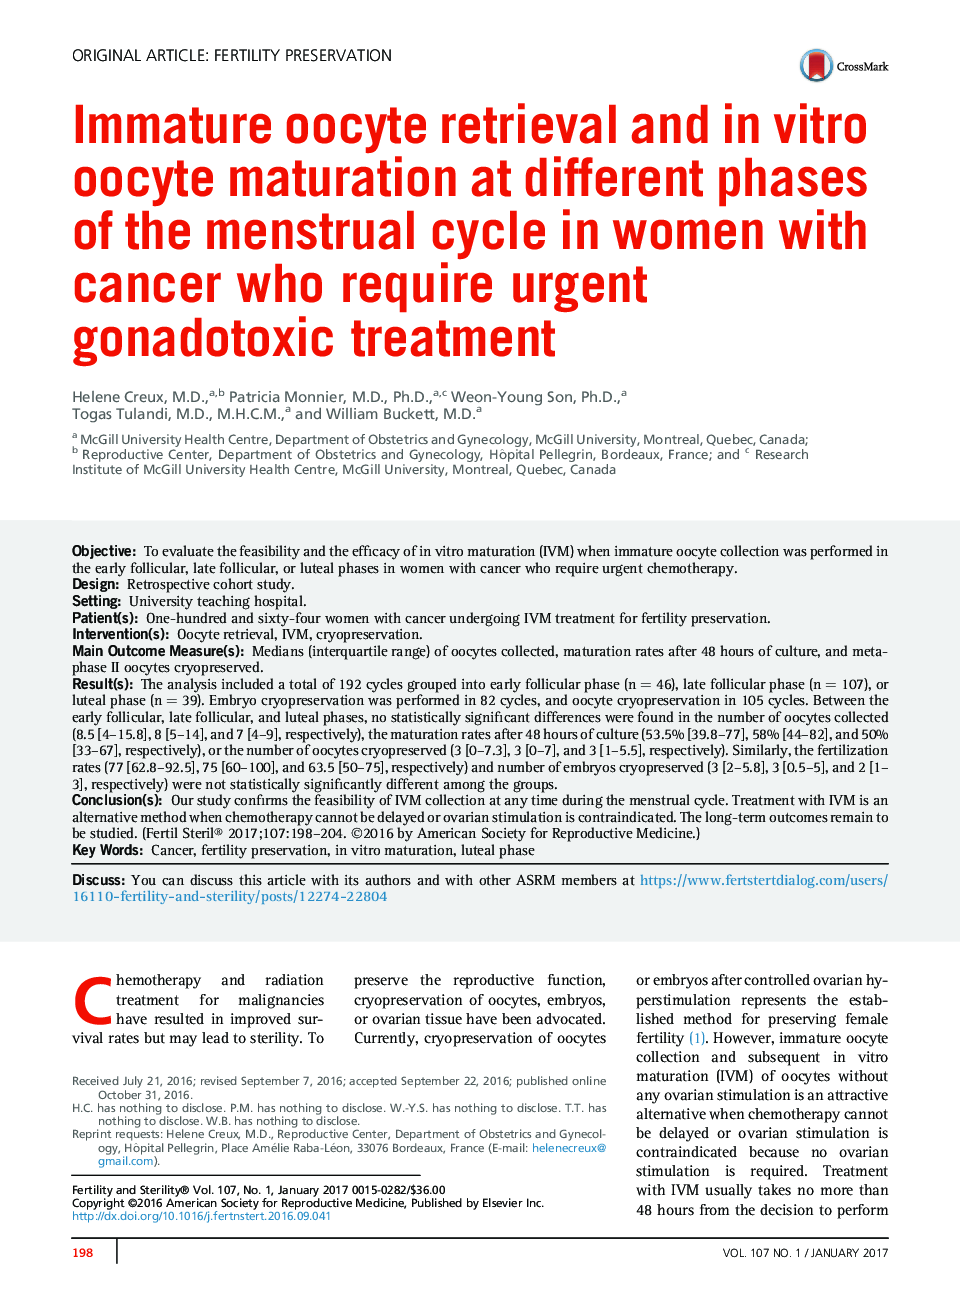 Immature oocyte retrieval and inÂ vitro oocyte maturation at different phases of the menstrual cycle in women with cancer who require urgent gonadotoxic treatment